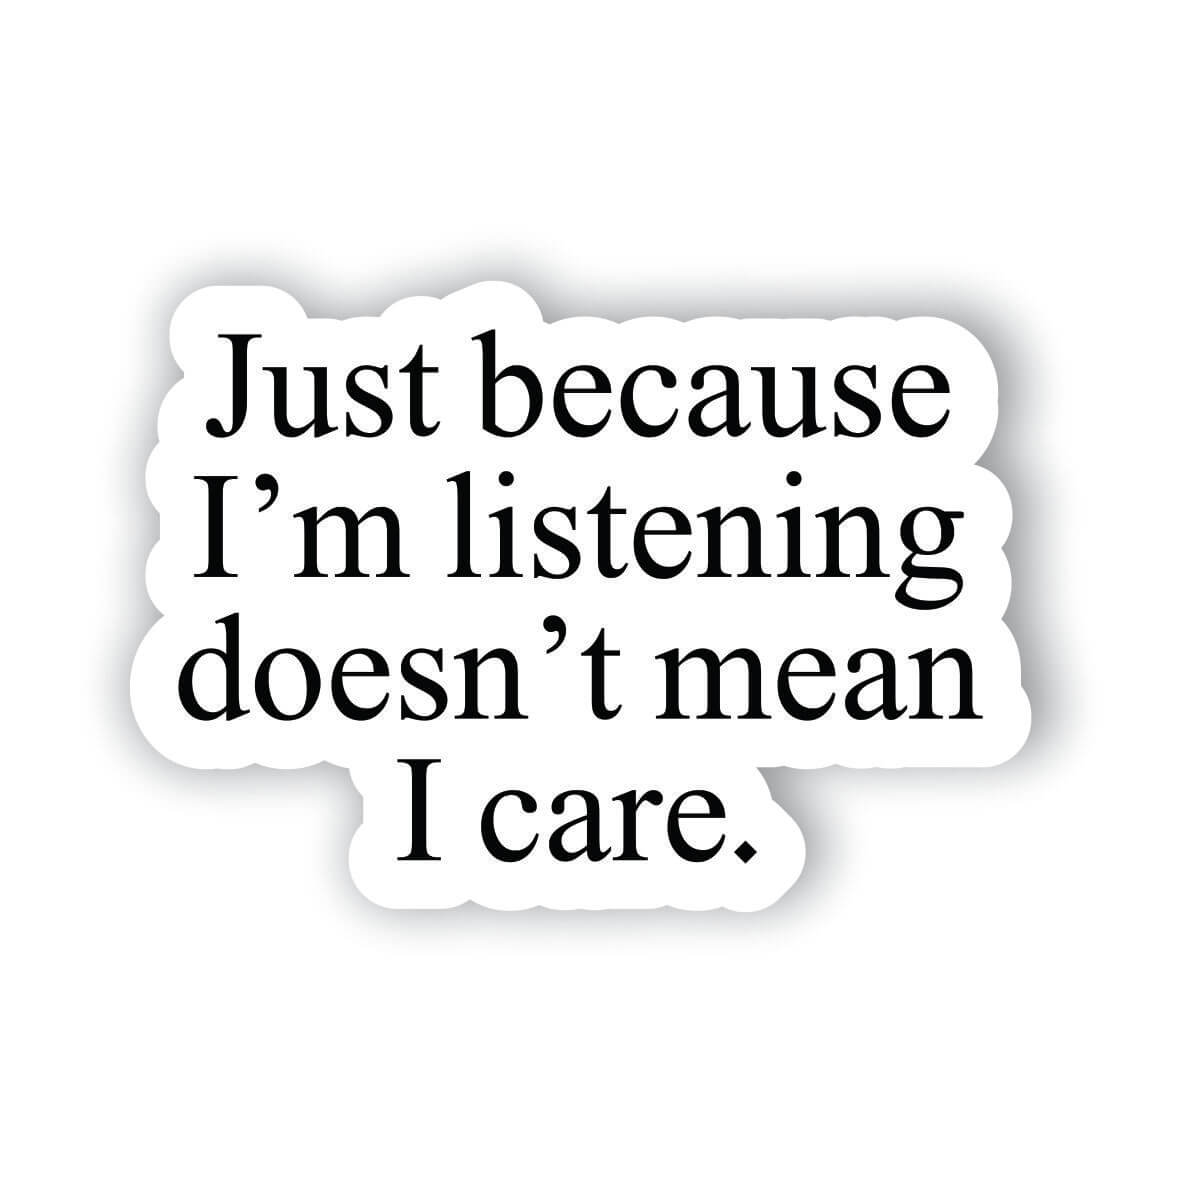 Just because I'm listening doesn't mean I care